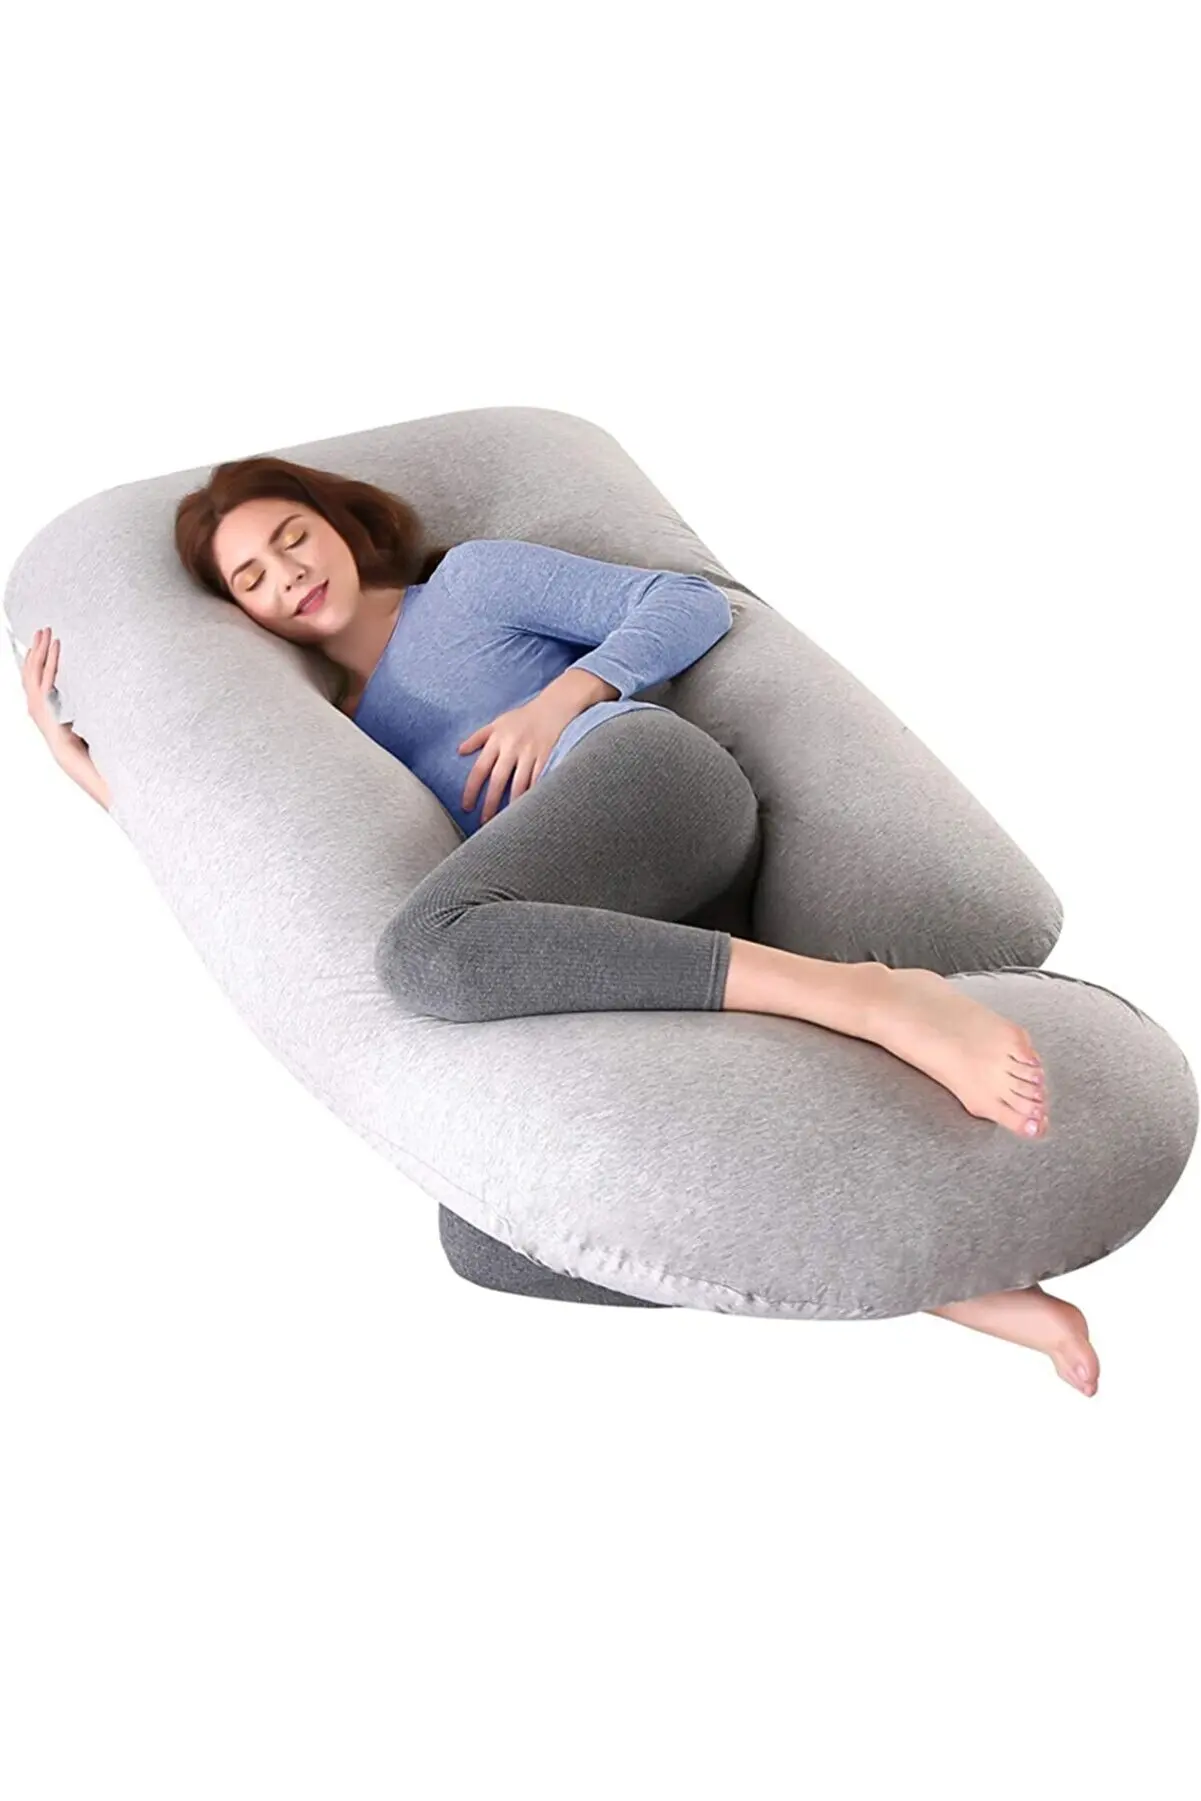 Pillow For Pregnant Pregnancy Positions U Shaped Support Full Body %100 Cotton Sleeping Maternity Adults Women Orthopedic Hug enlarge